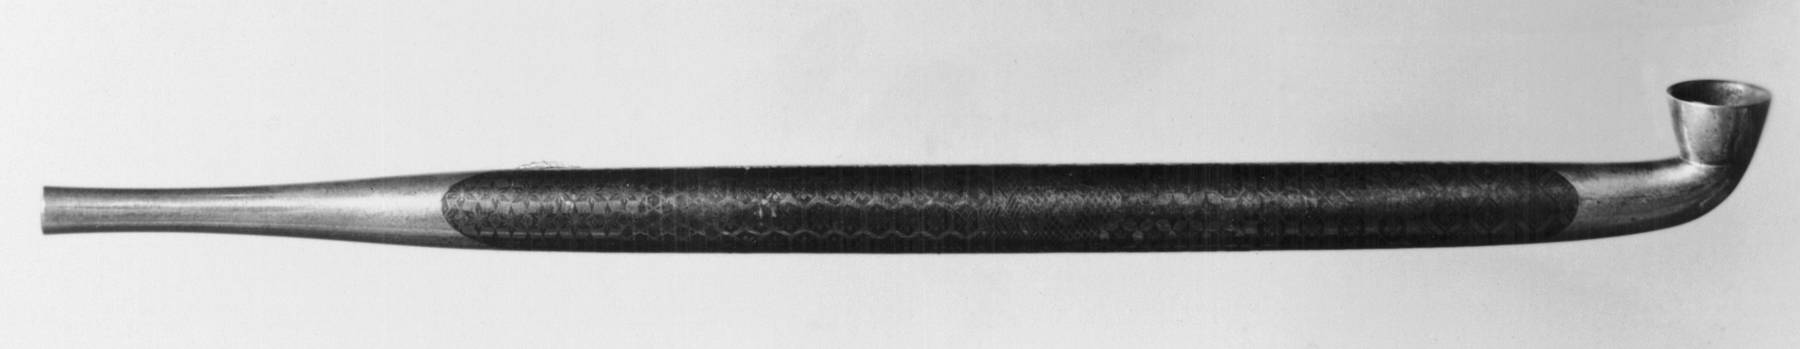 Image for Pipe with Textile Patterns